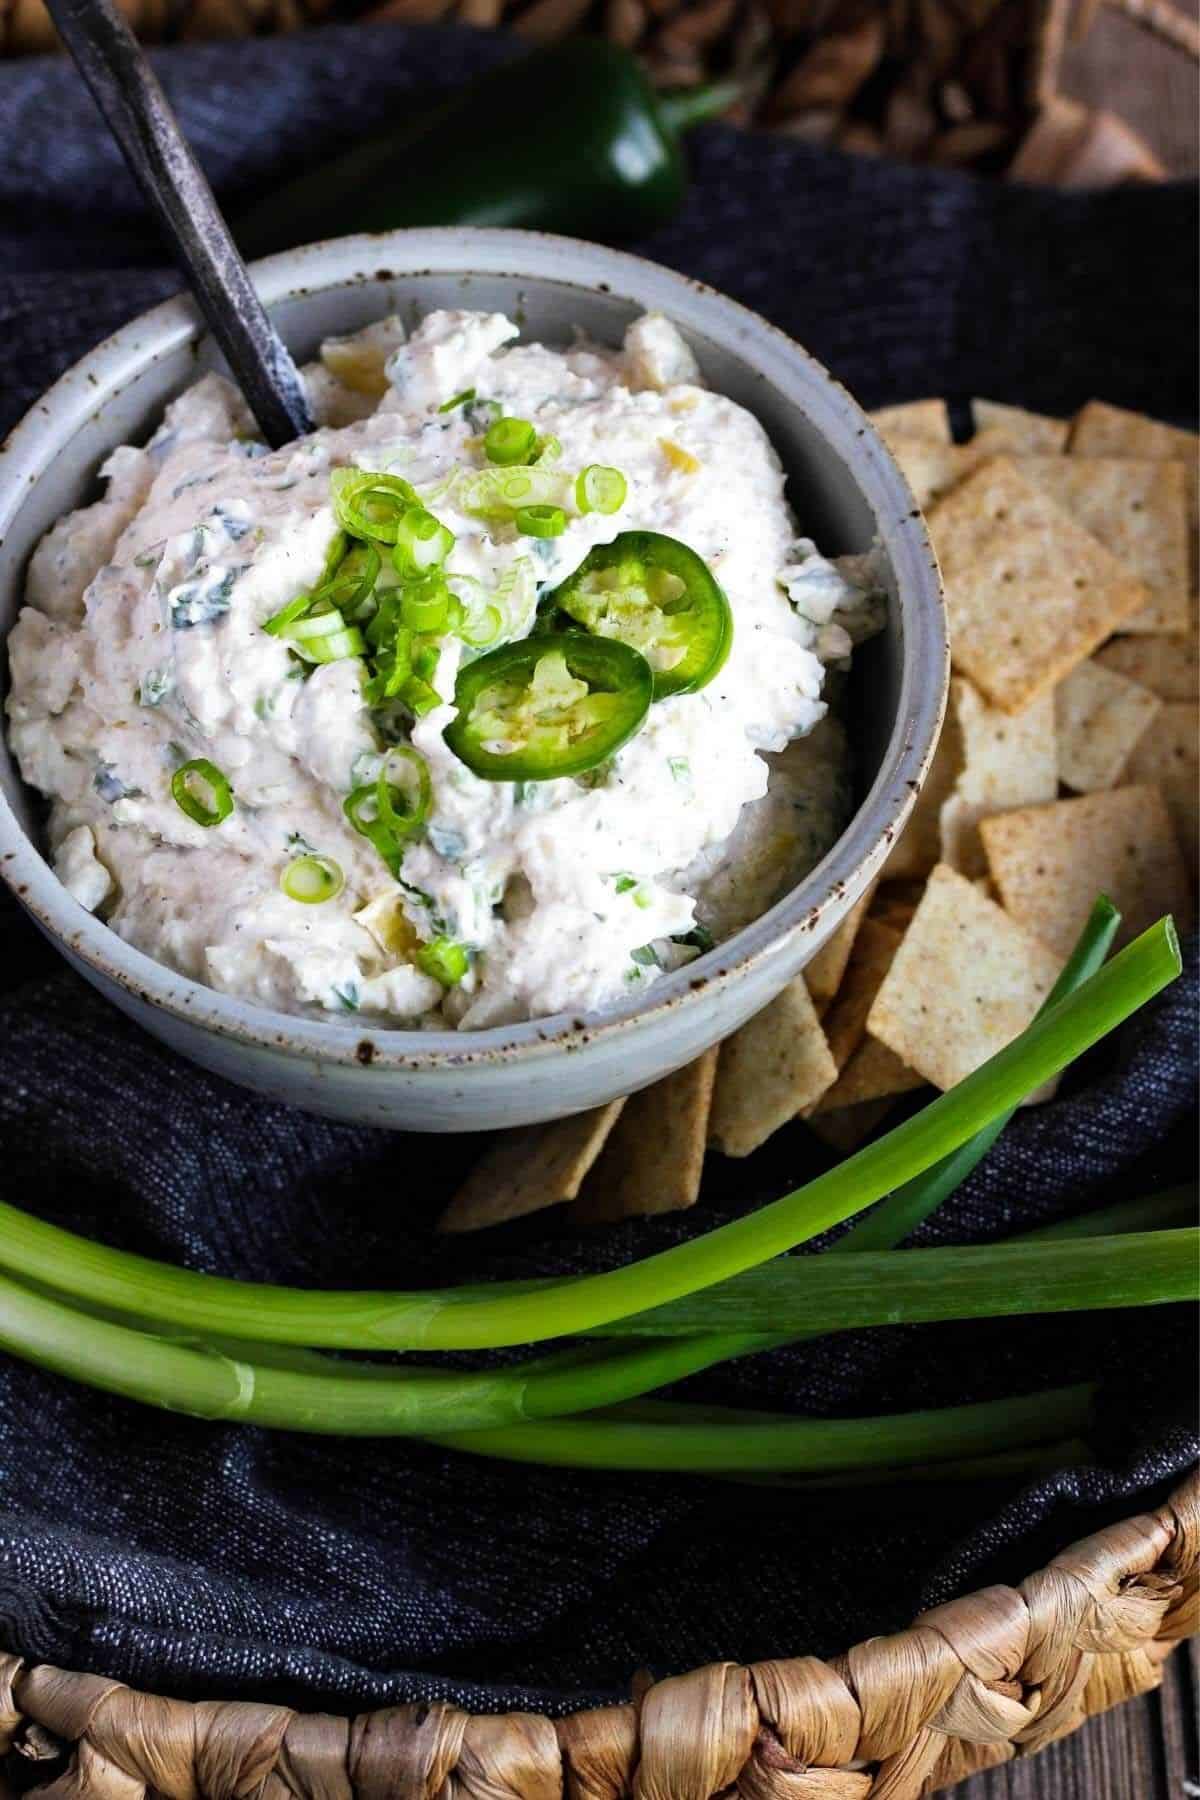 Bowl of jalapeno artichoke dip with crackers and green onion stalks.